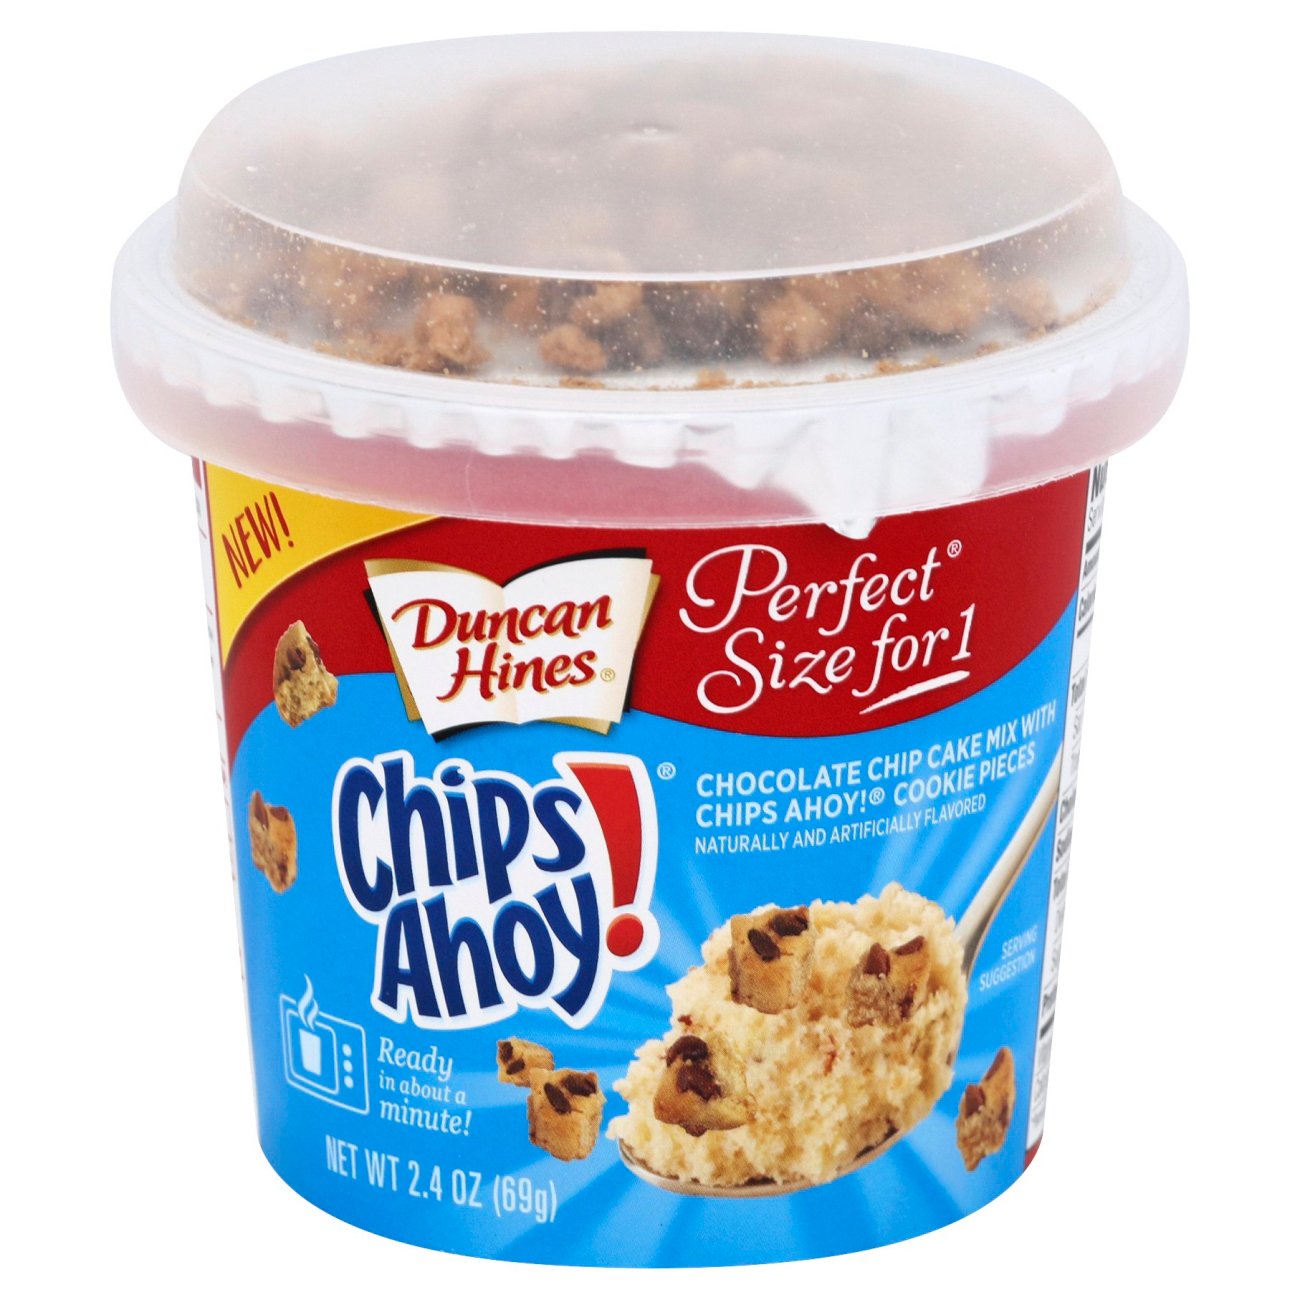 Duncan Hines Perfect Size For 1 Chips Ahoy Cake Mix Shop Baking Mixes At H E B